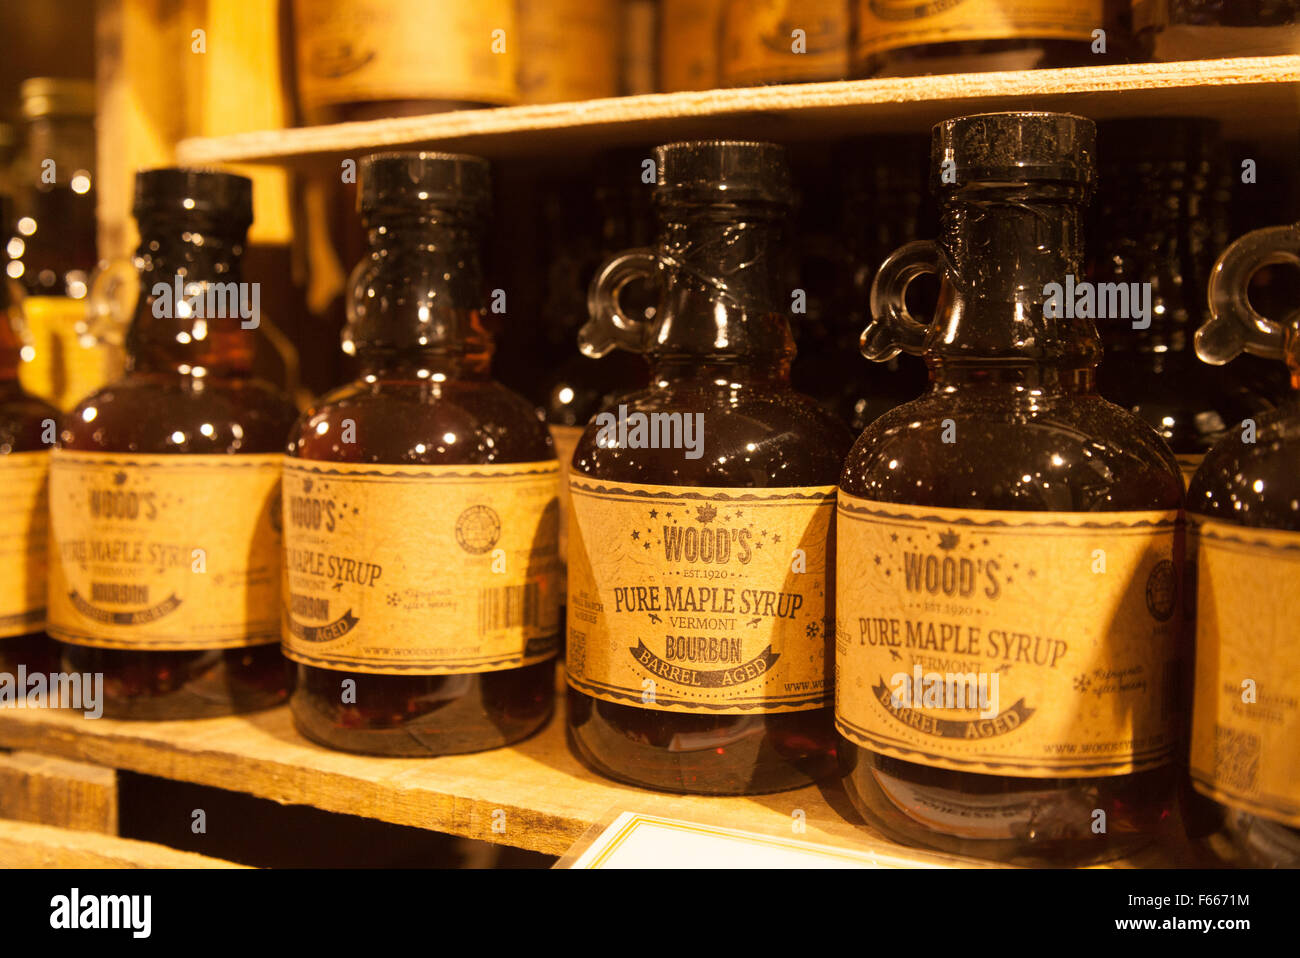 Bottles of Maple Syrup on the shelf in a store in Stowe, Vermont New England USA Stock Photo